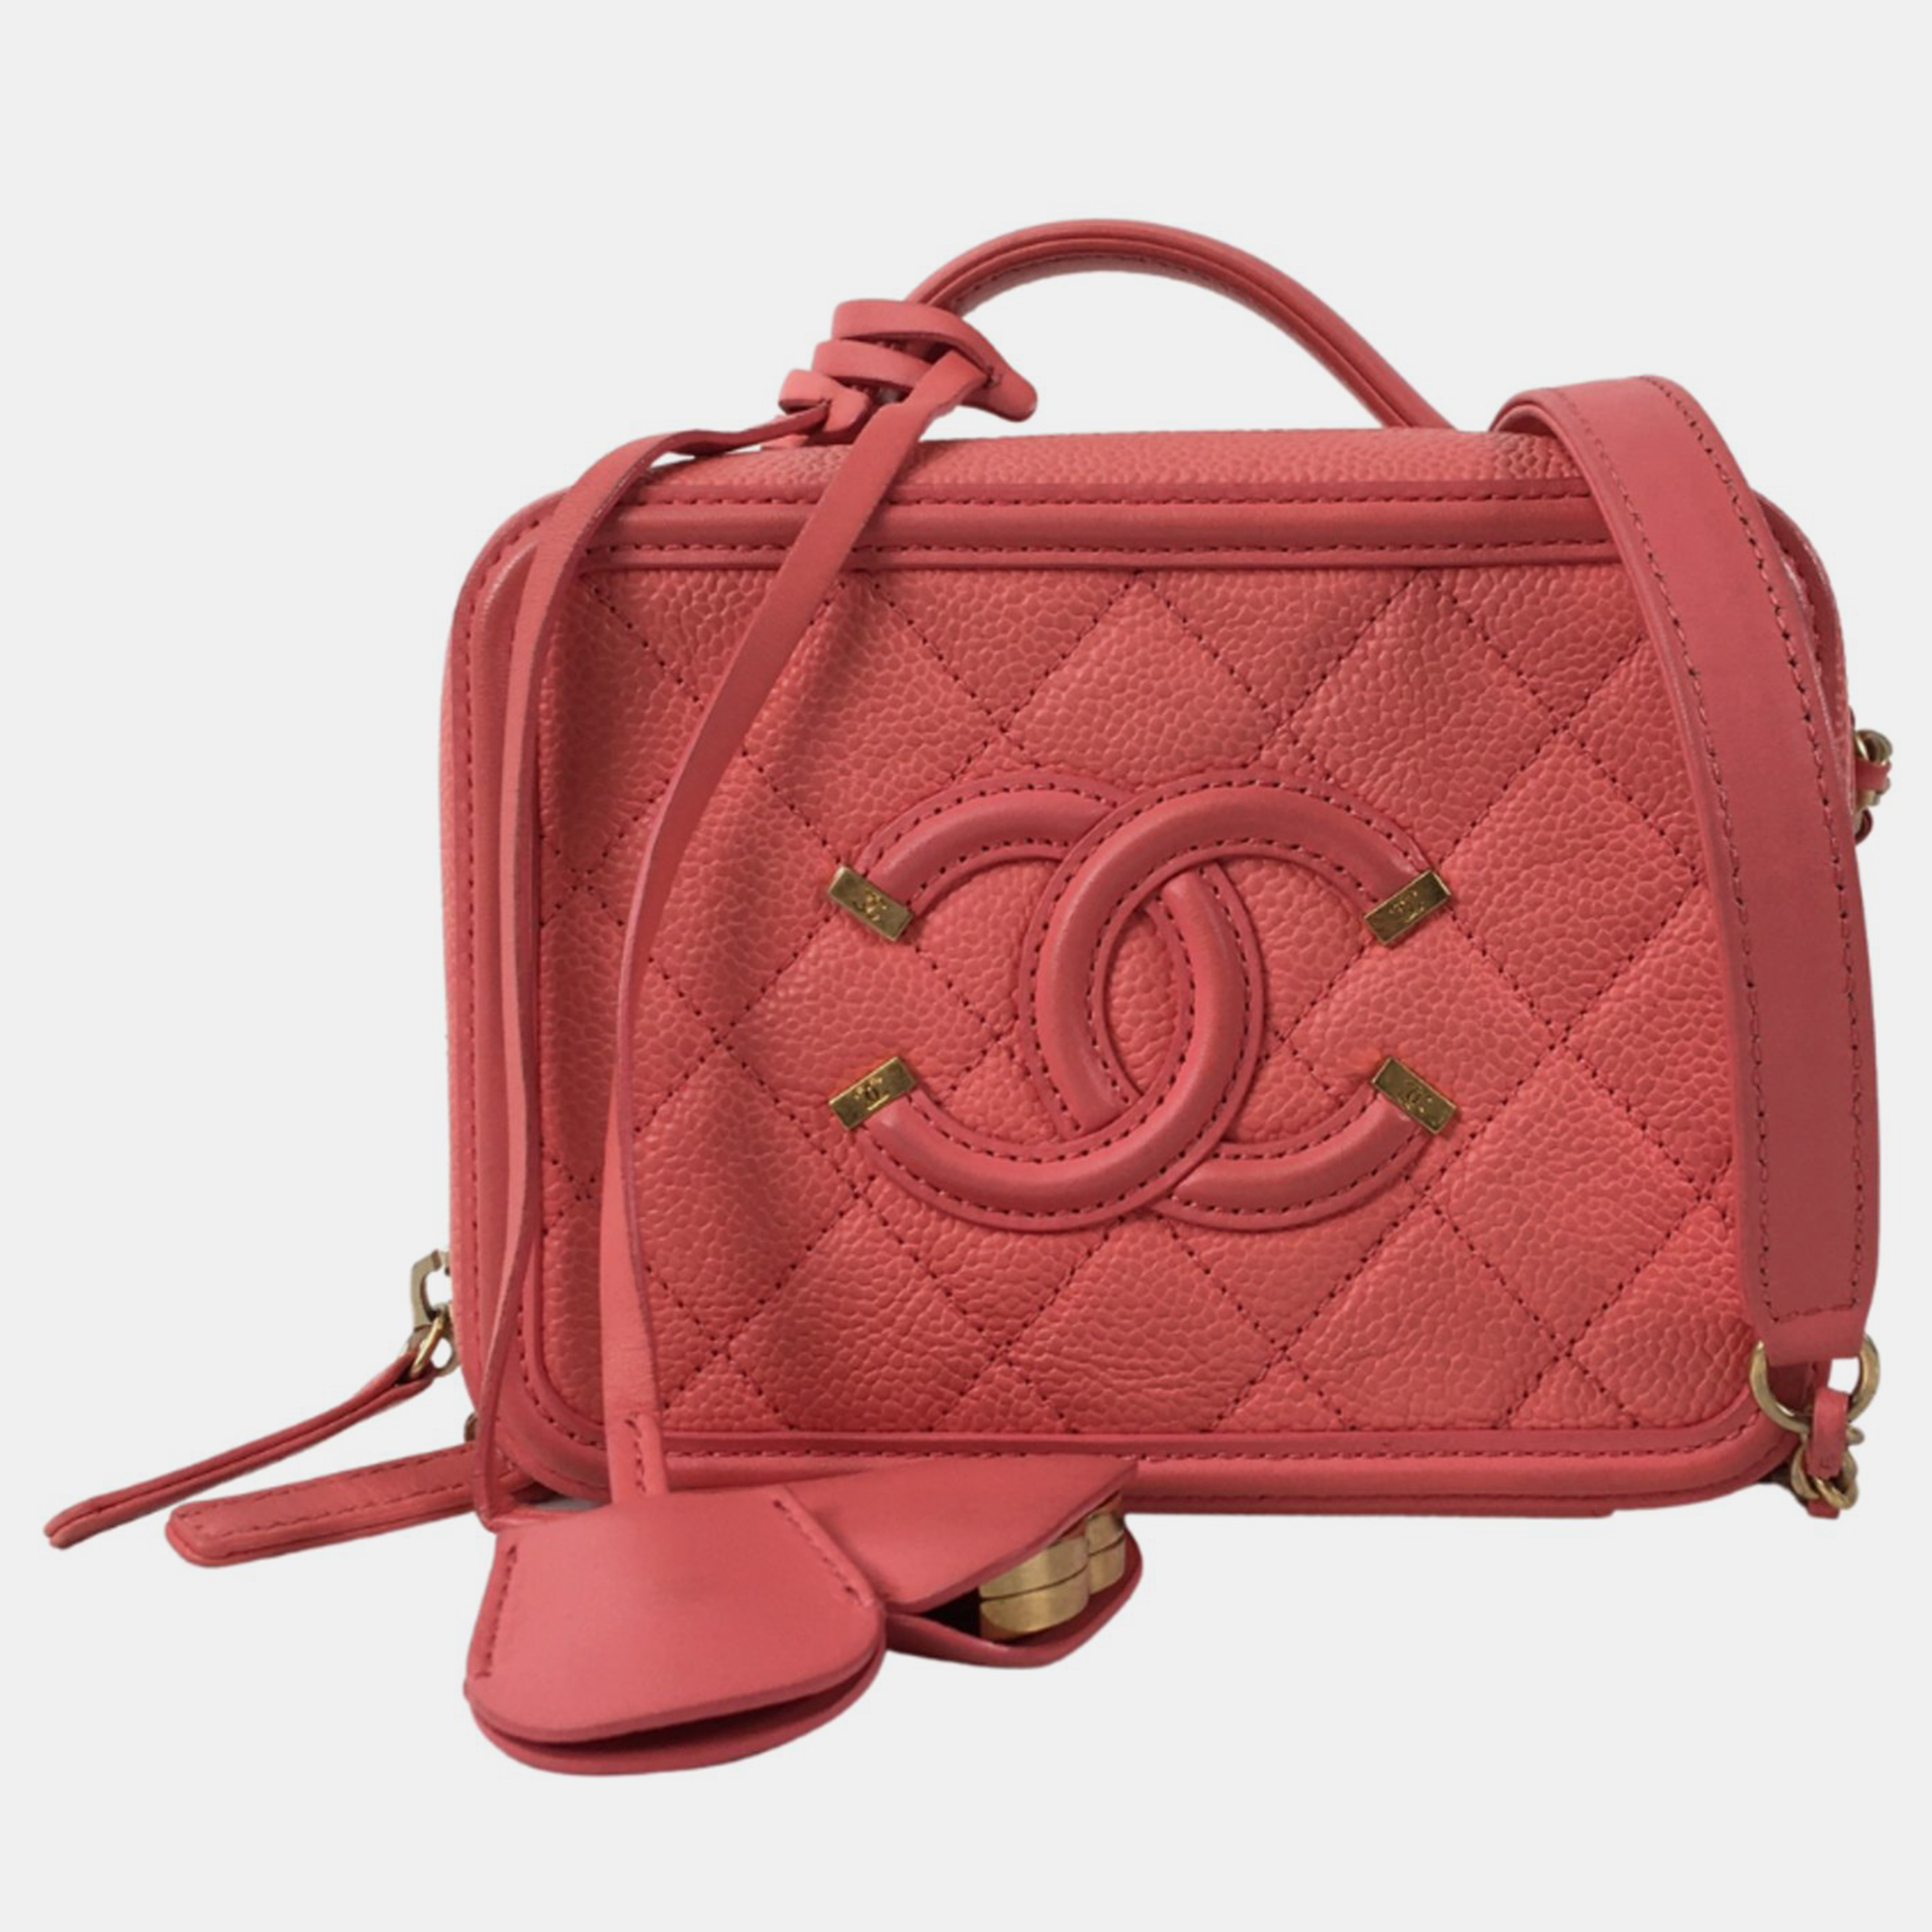 Chanel peach leather small filigree shoulder bags